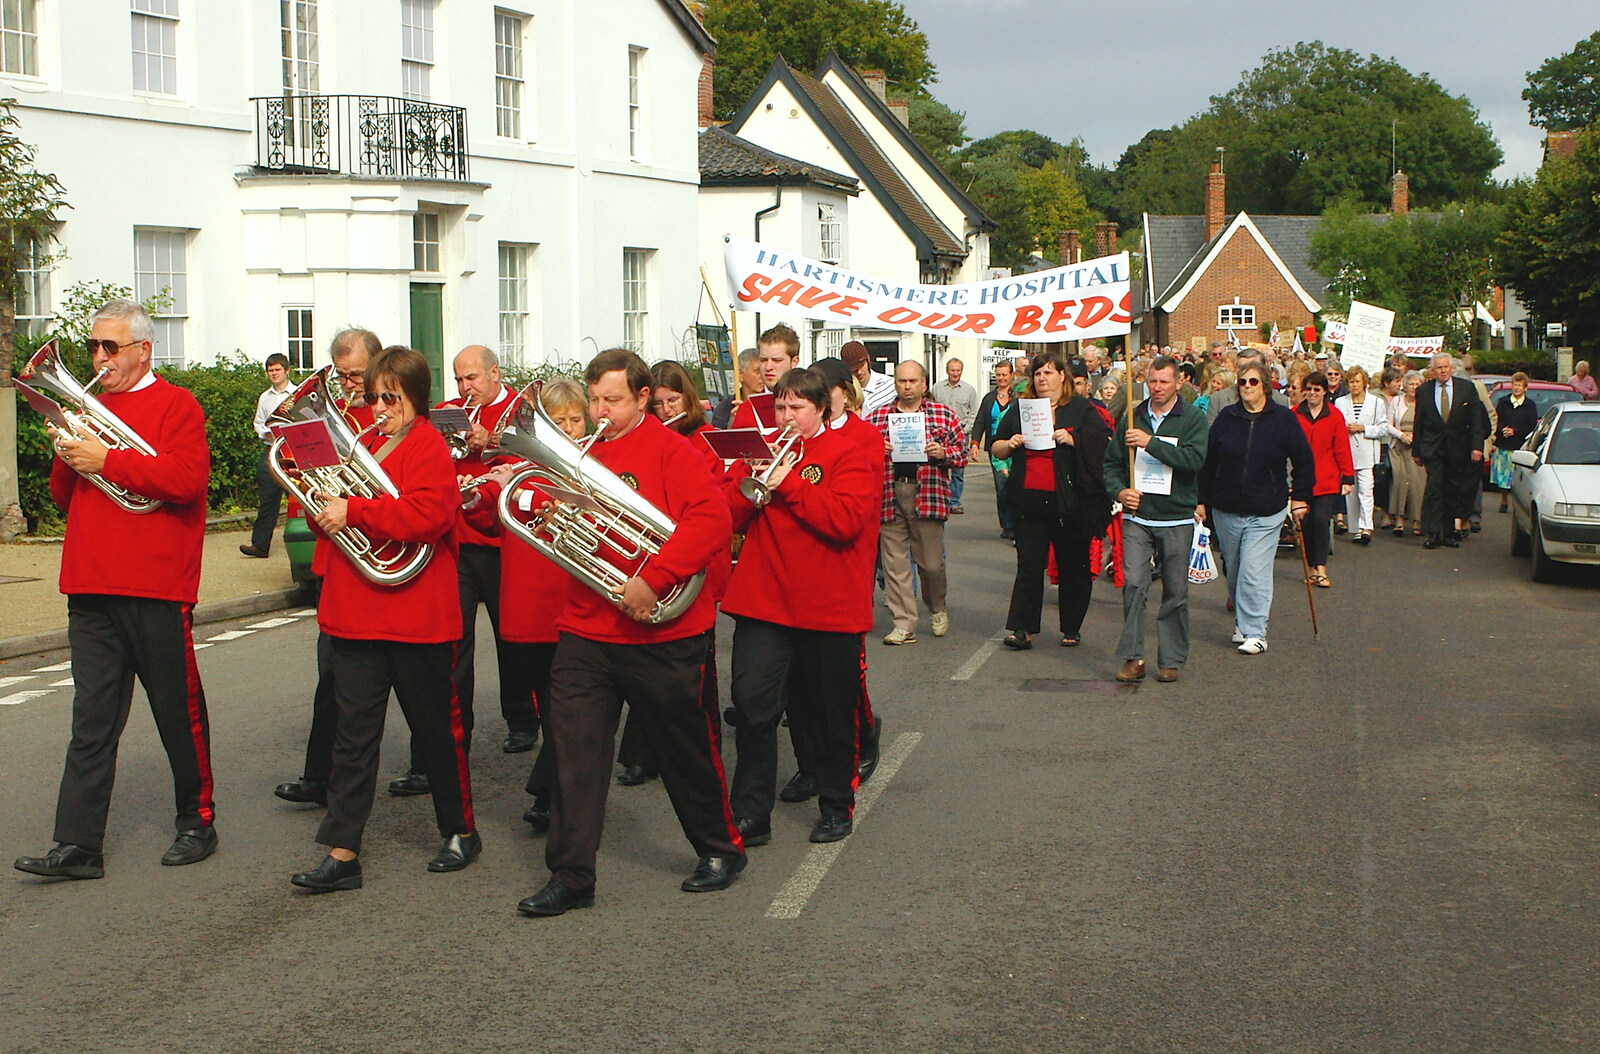 The GSB on Lambseth Street from Save Hartismere: a Hospital Closure Protest, Eye, Suffolk - 17th September 2005